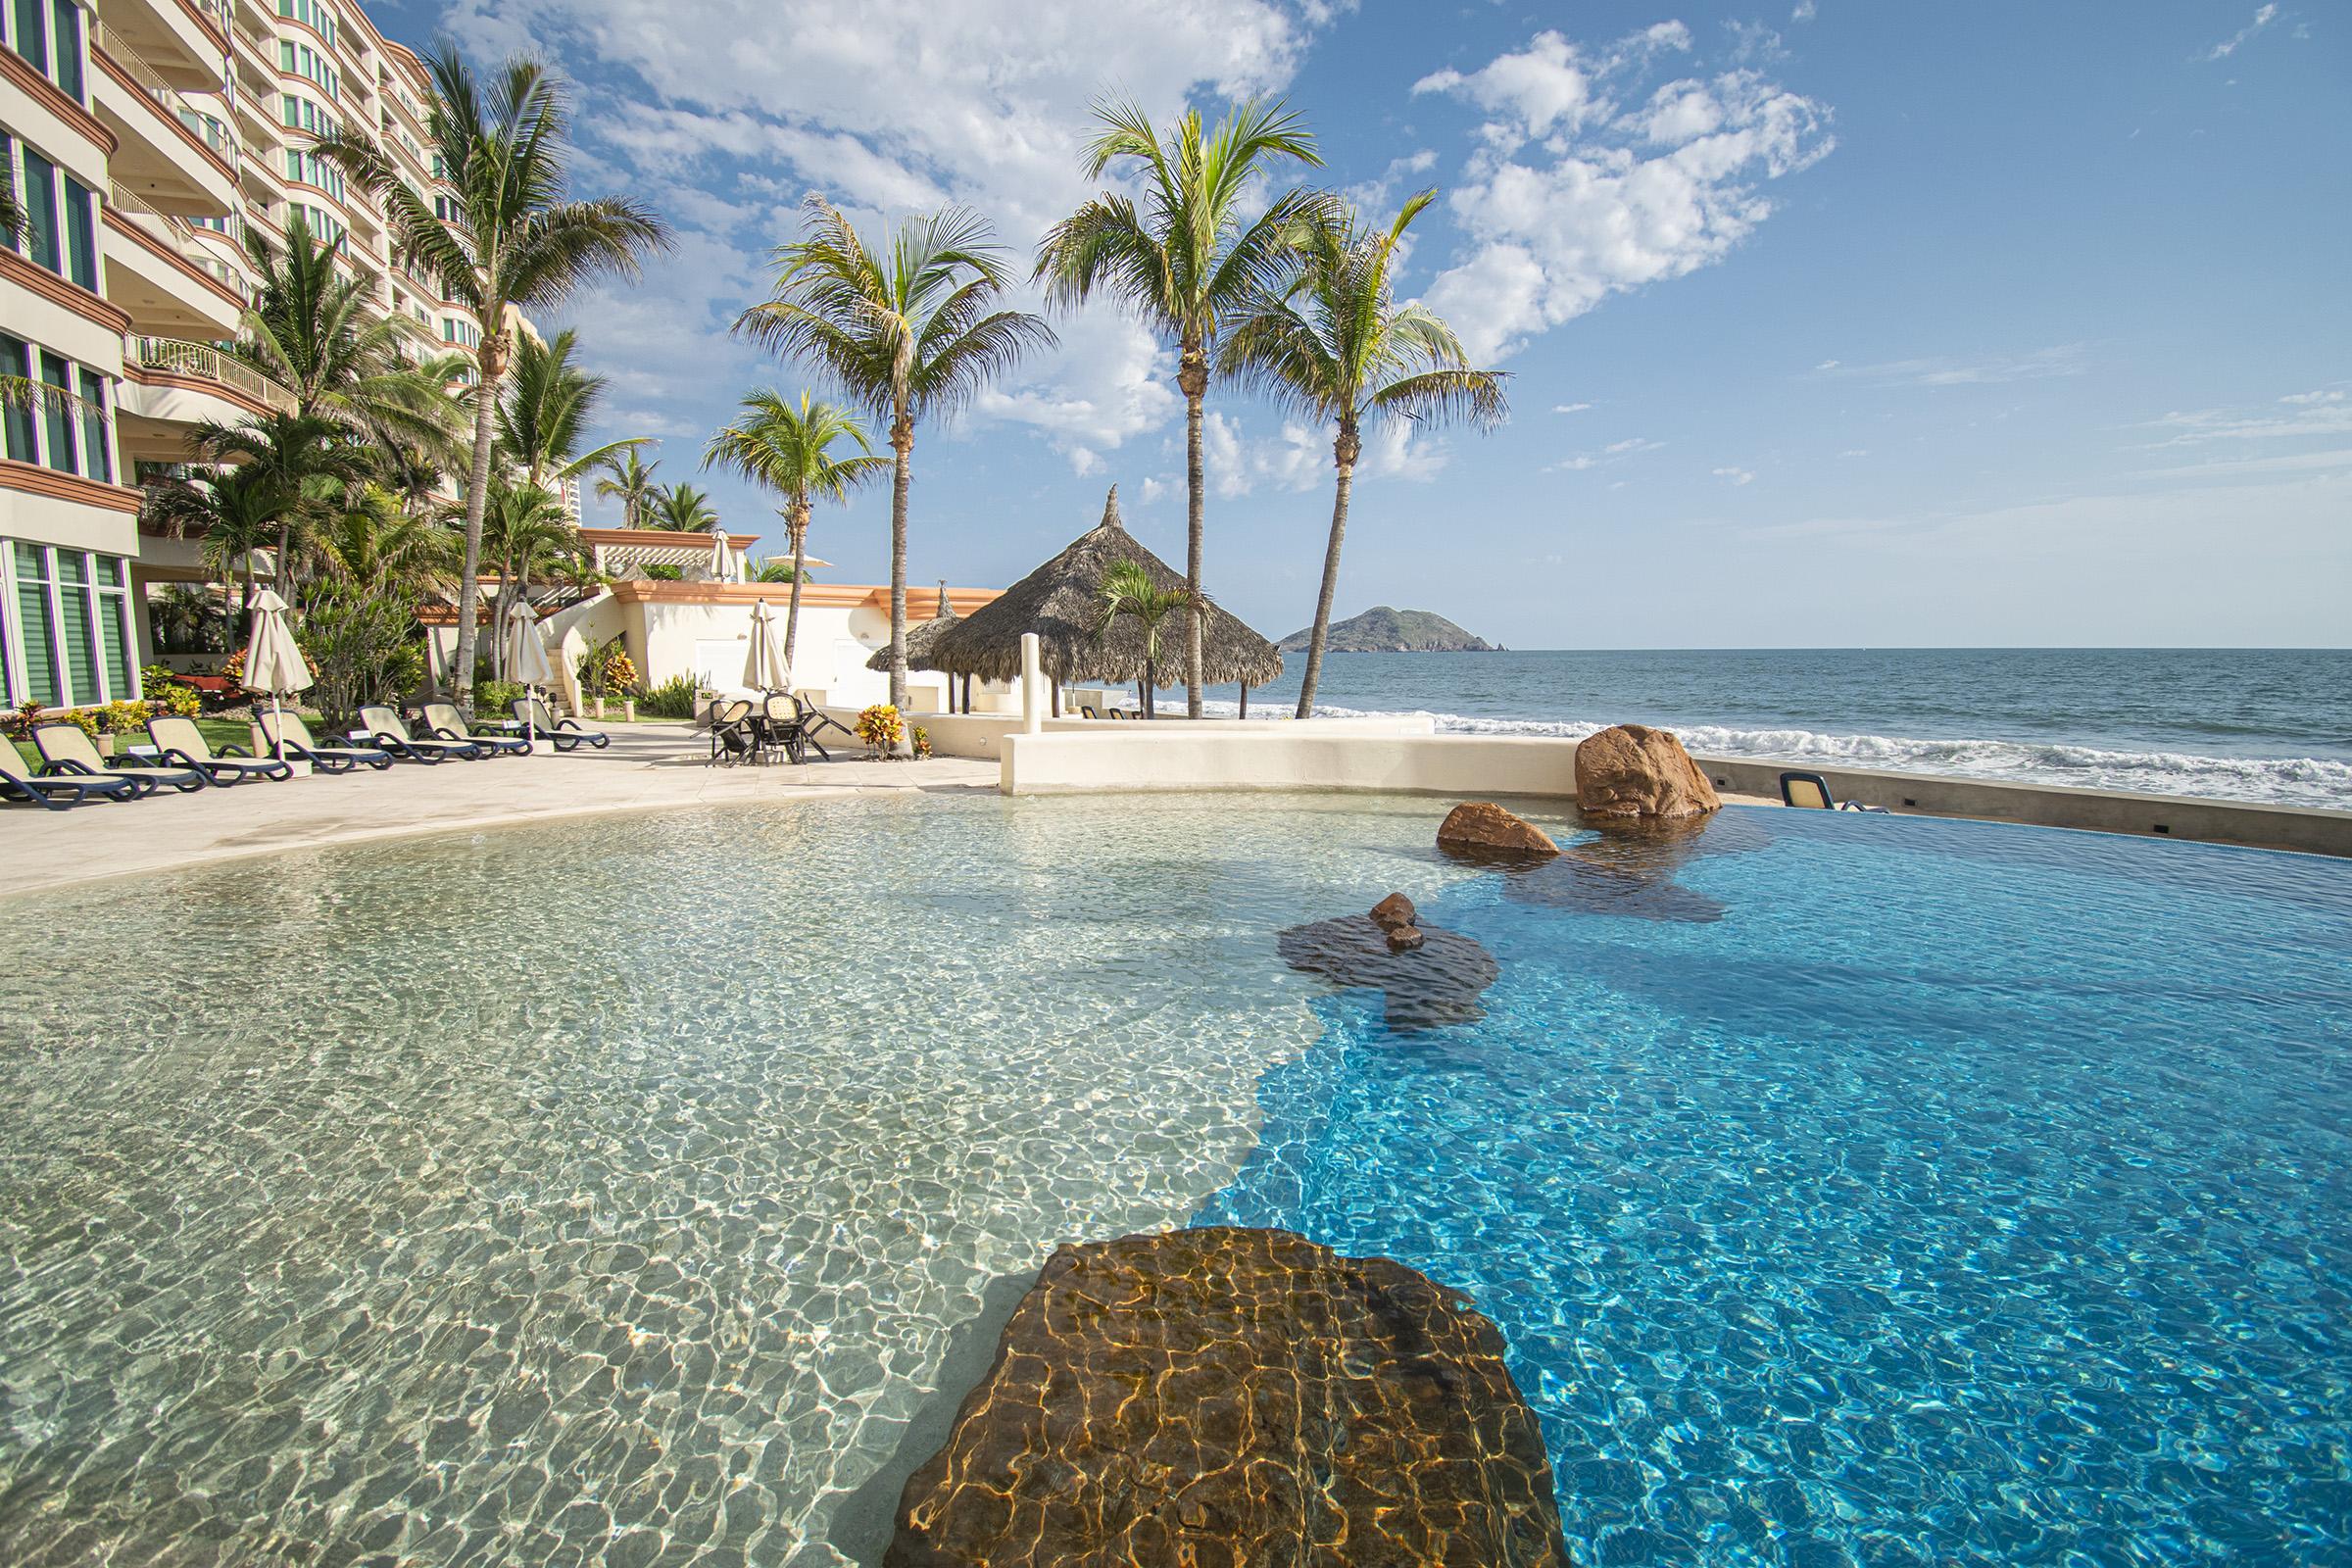 Property Image 1 - Mazatlán Paraiso I Beachfront Condo with Heated Pool and First Class Amenities!